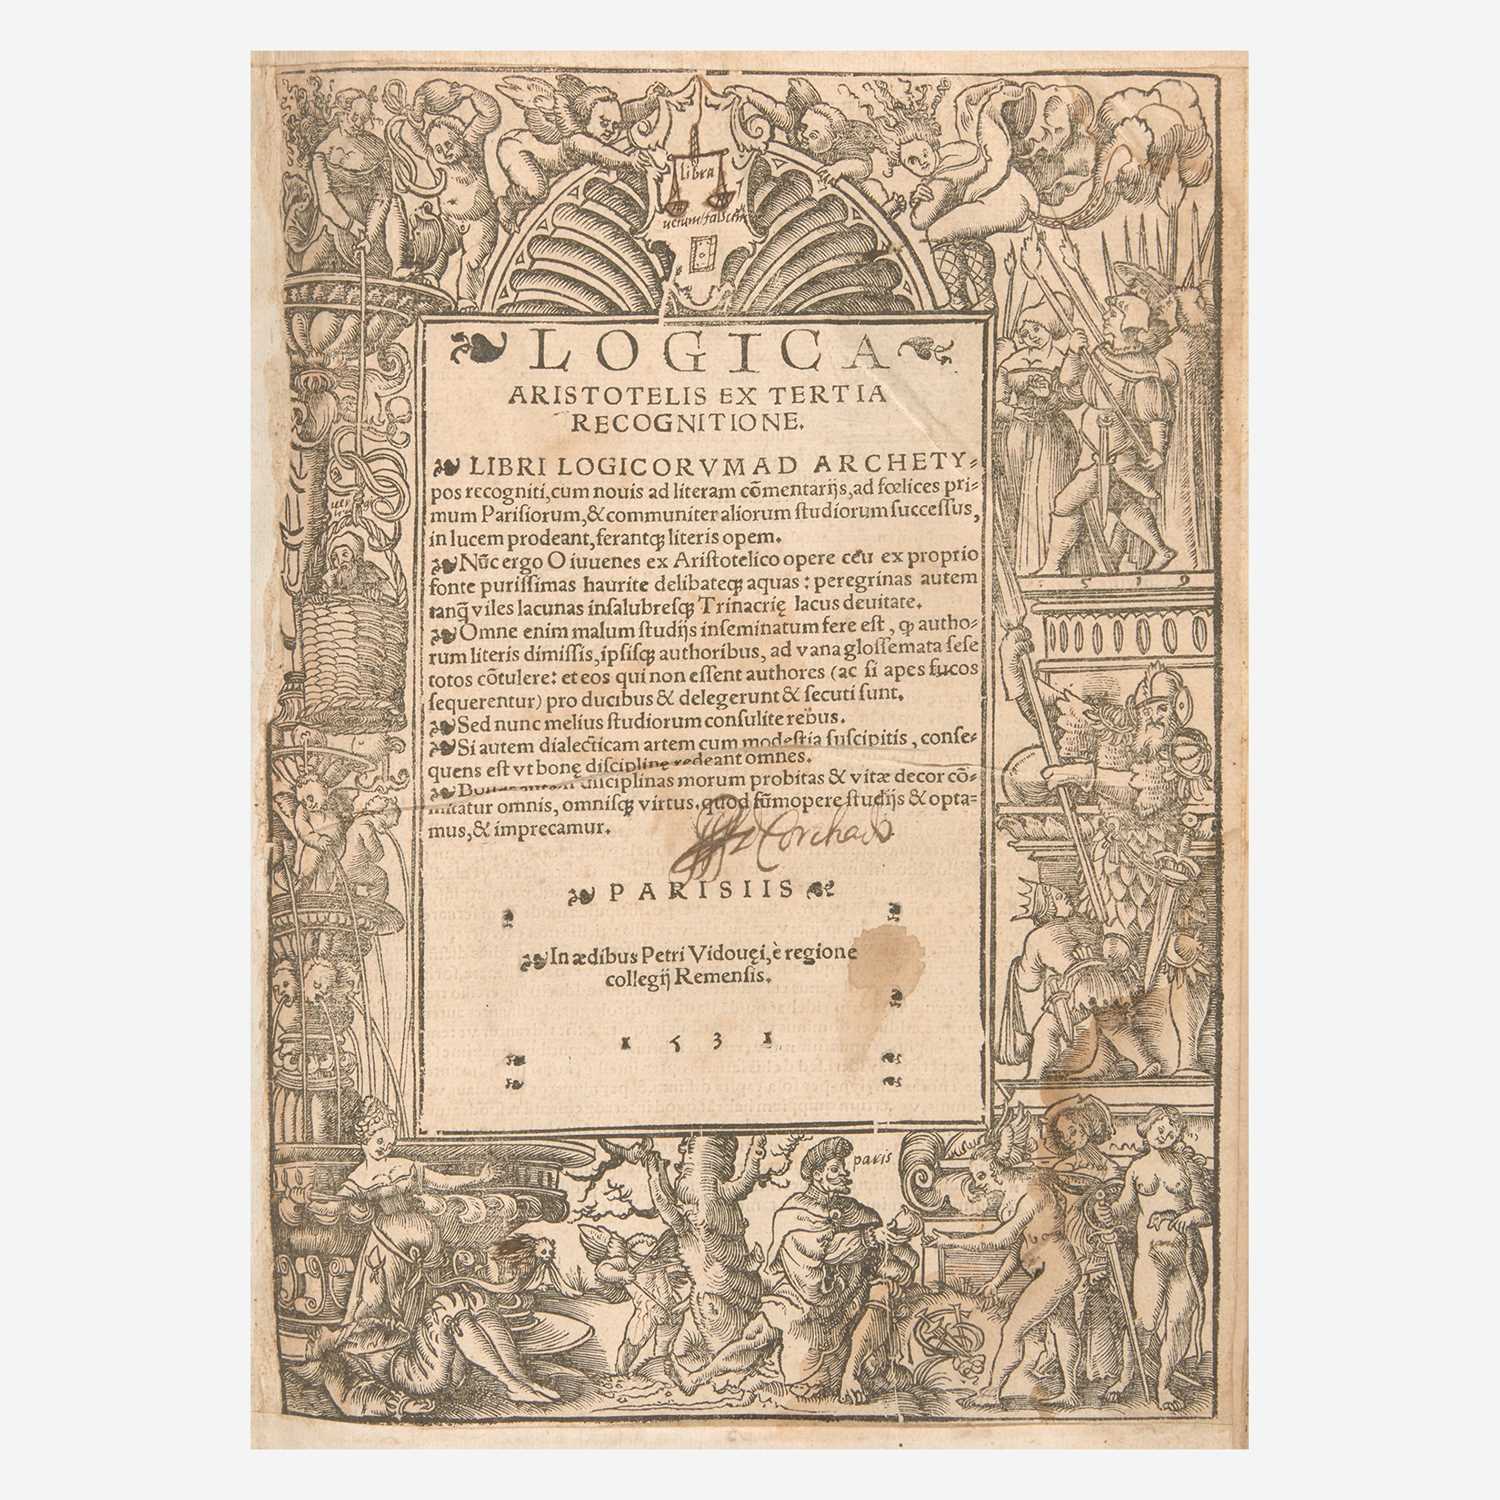 Lot 59 - [Early Printing] [Aristotle]